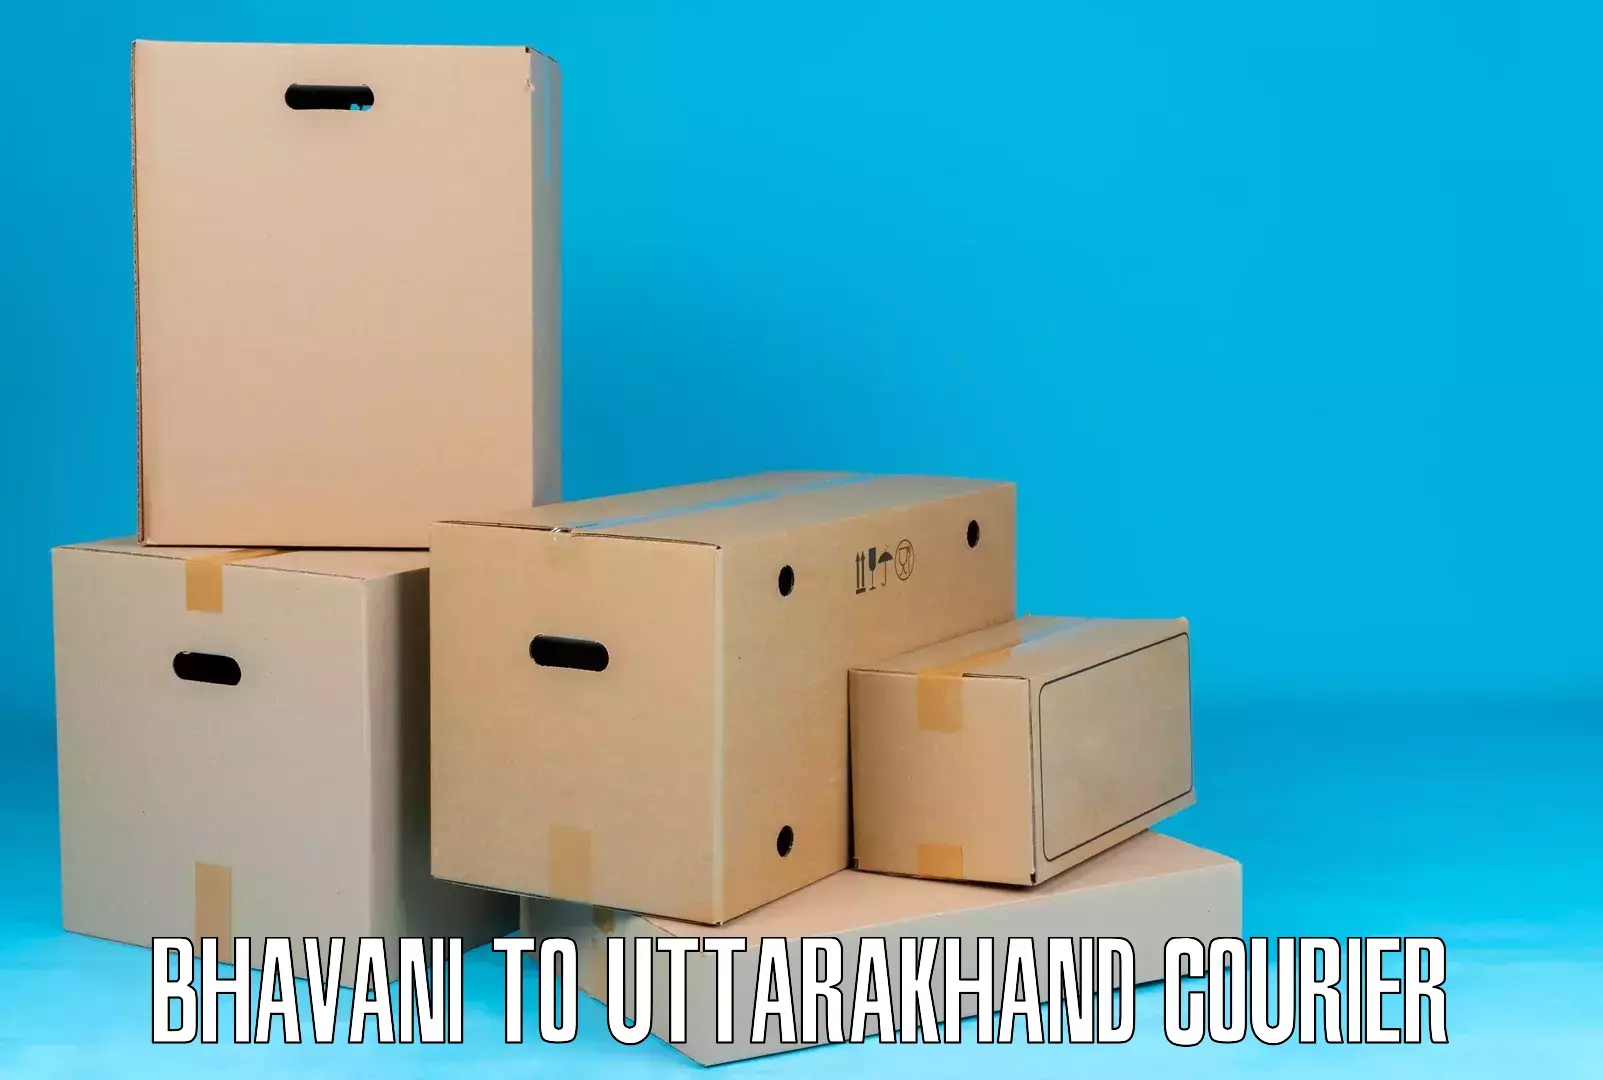 State-of-the-art courier technology Bhavani to Tehri Garhwal